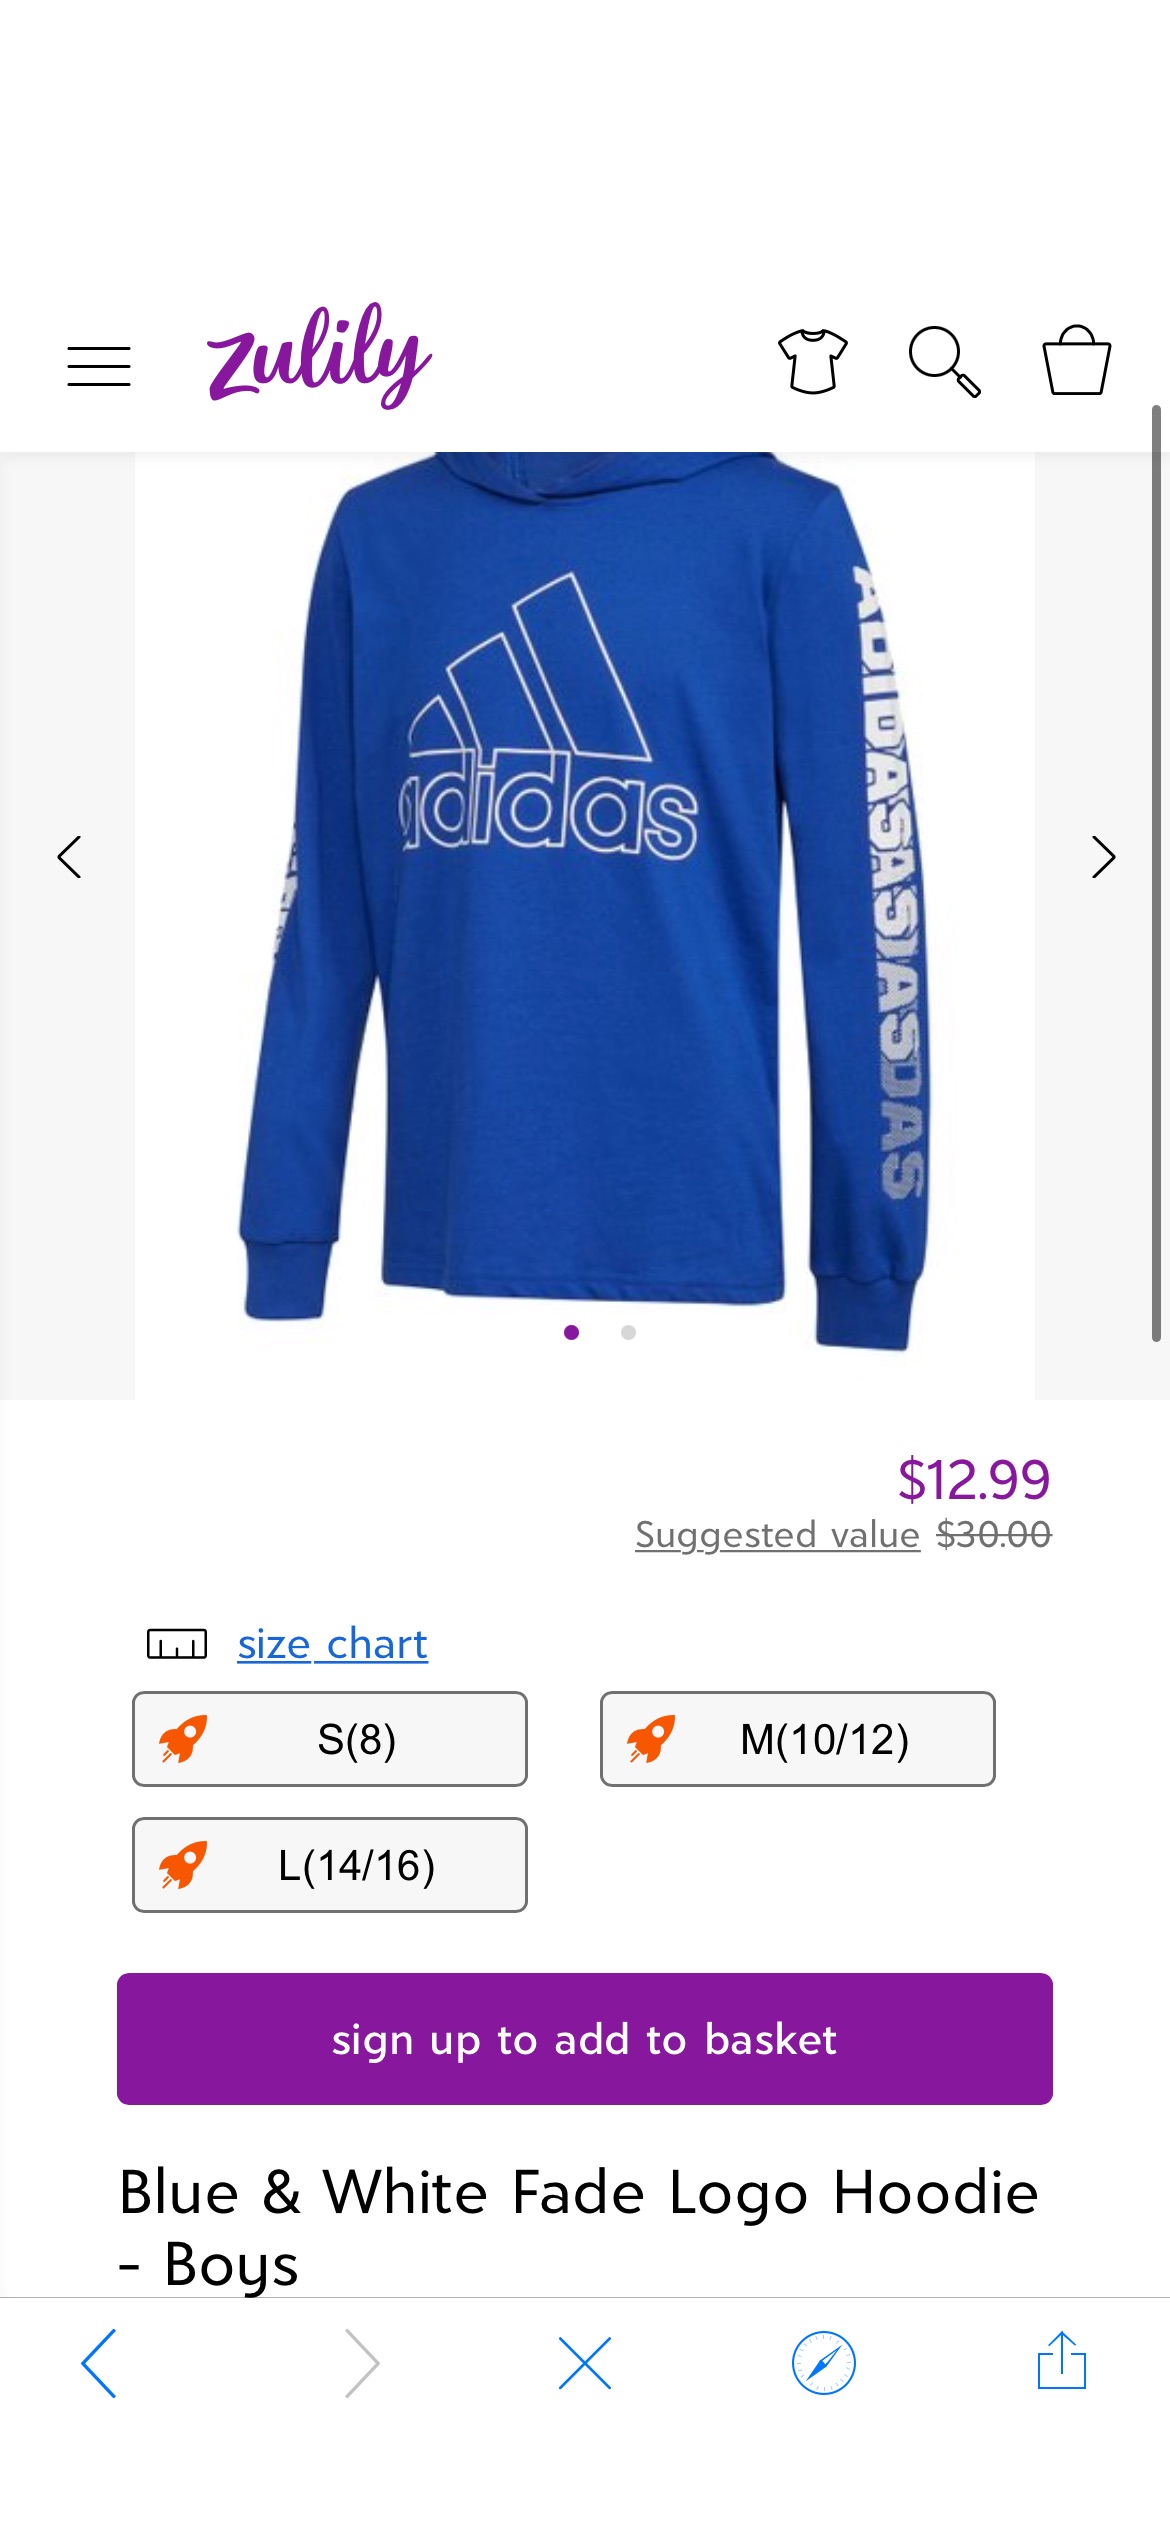 adidas Blue & White Fade Logo Hoodie - Boys | Best Price and Reviews | Zulily